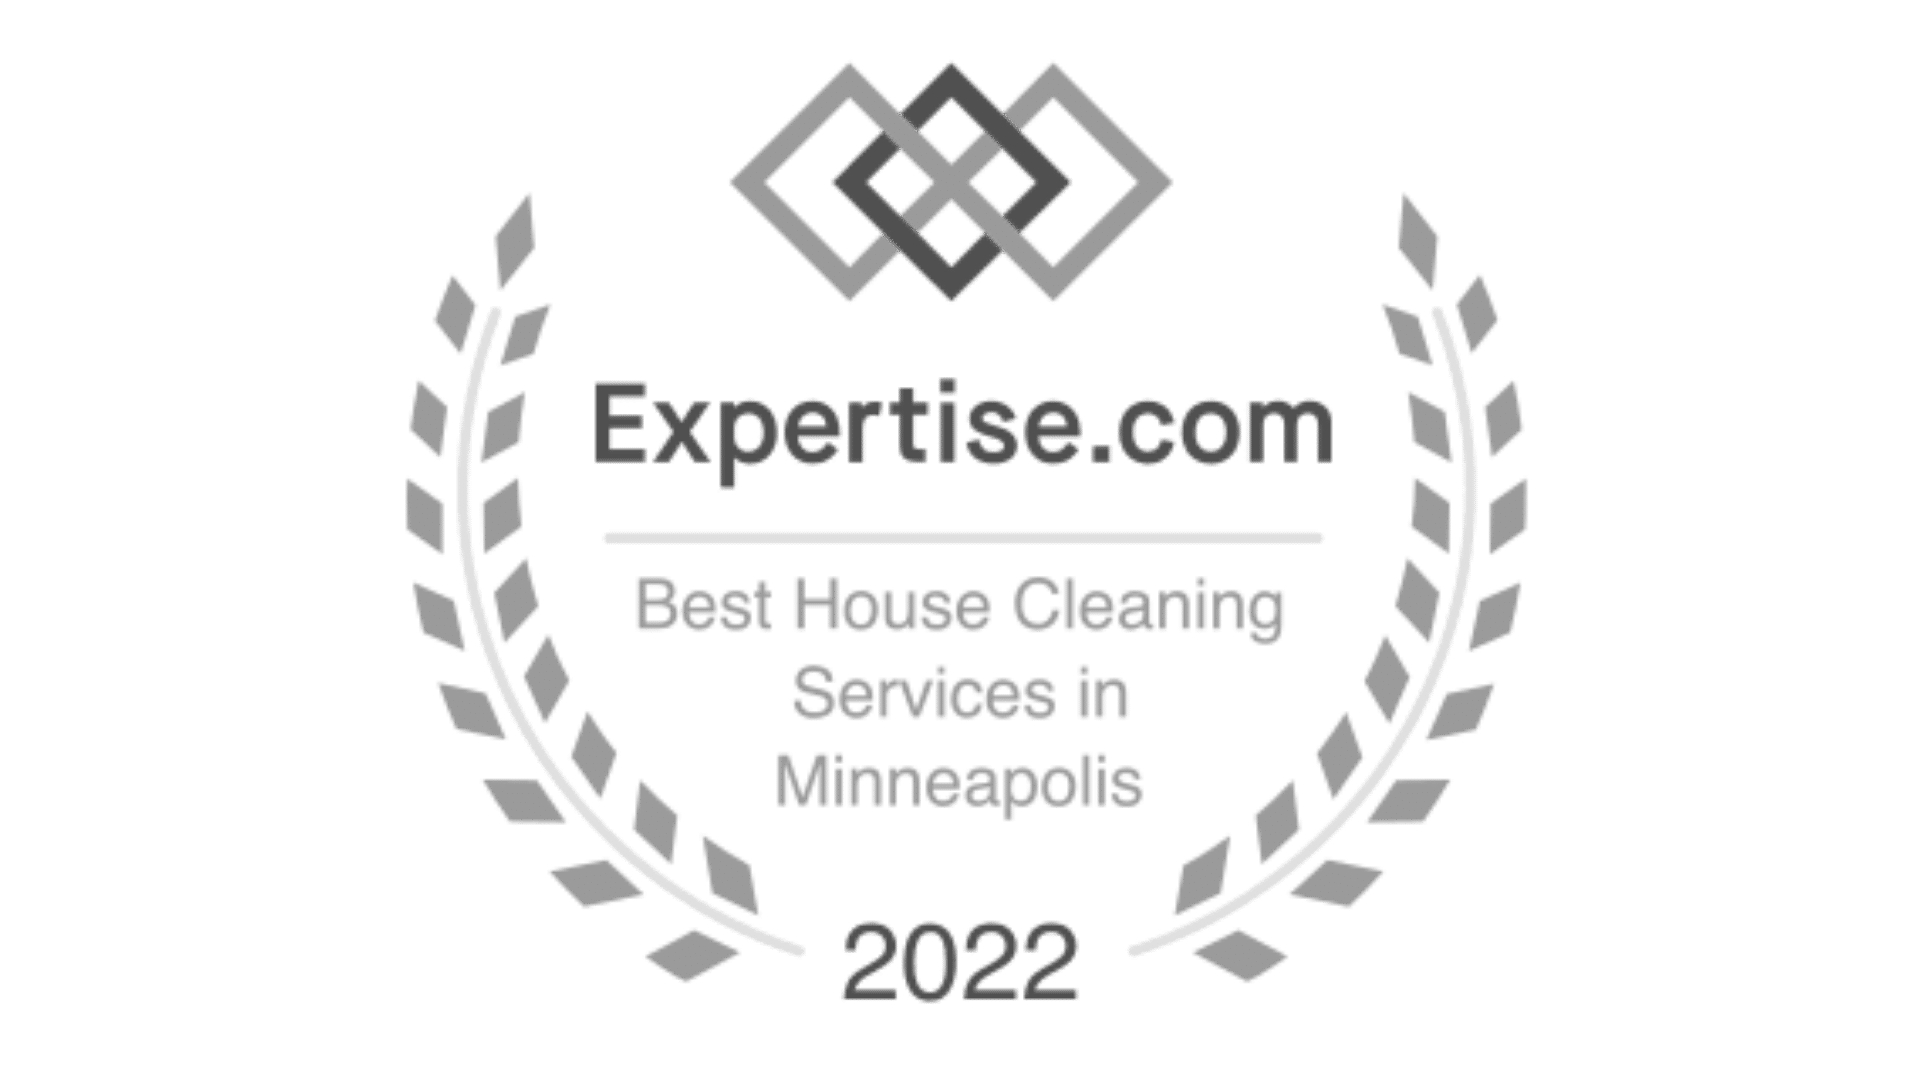 Looking for the best house cleaning services in Minneapolis? Look no further. Our team of experts provides top-notch house cleaning services that will leave your home sparkling clean.